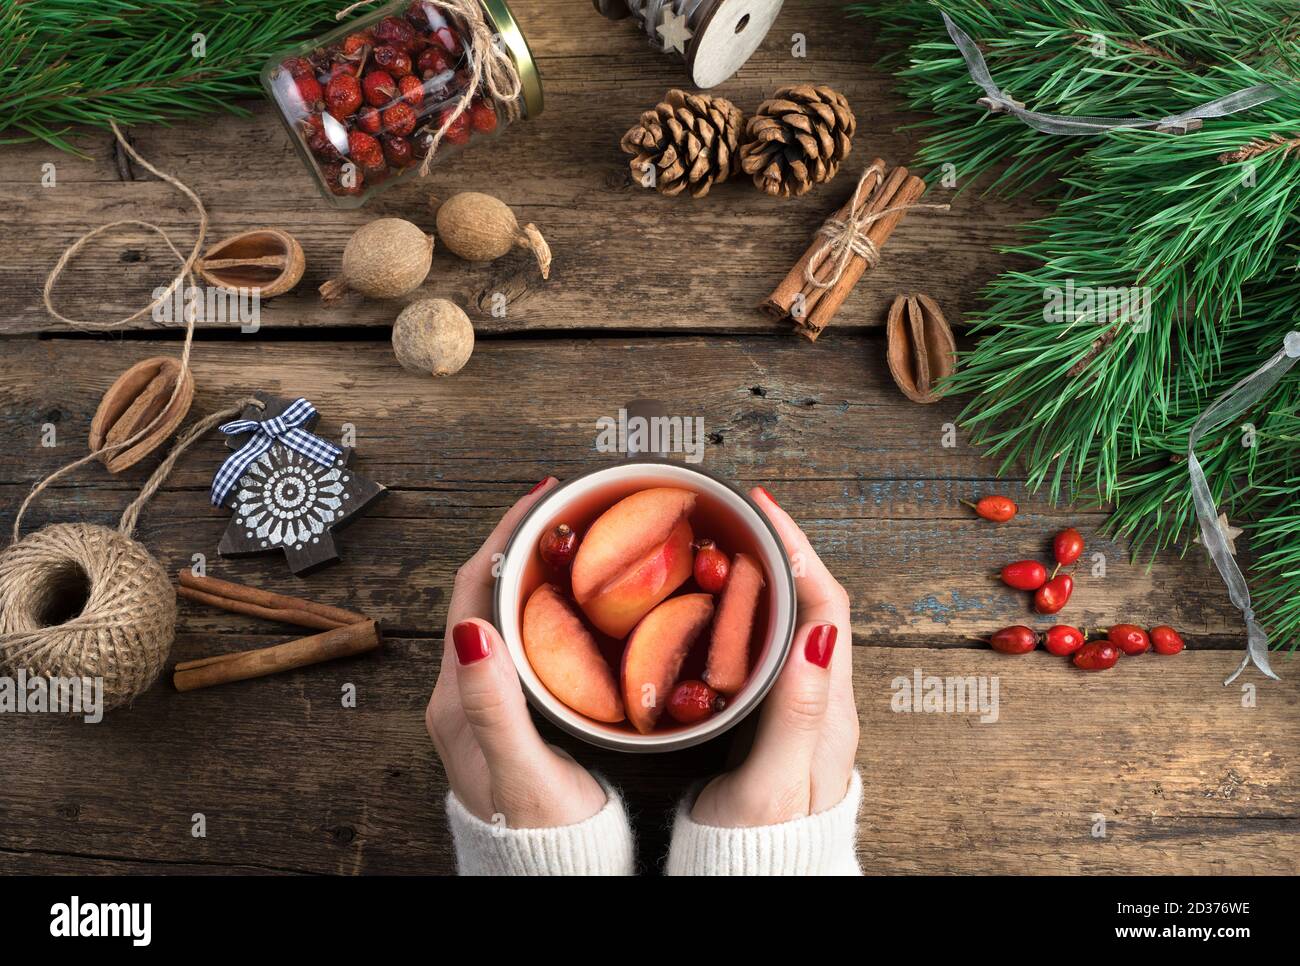 Women's hands hold a mug of mulled wine on a dark wooden background surrounded by Christmas toys, berries, cinnamon and pine branches. Stock Photo